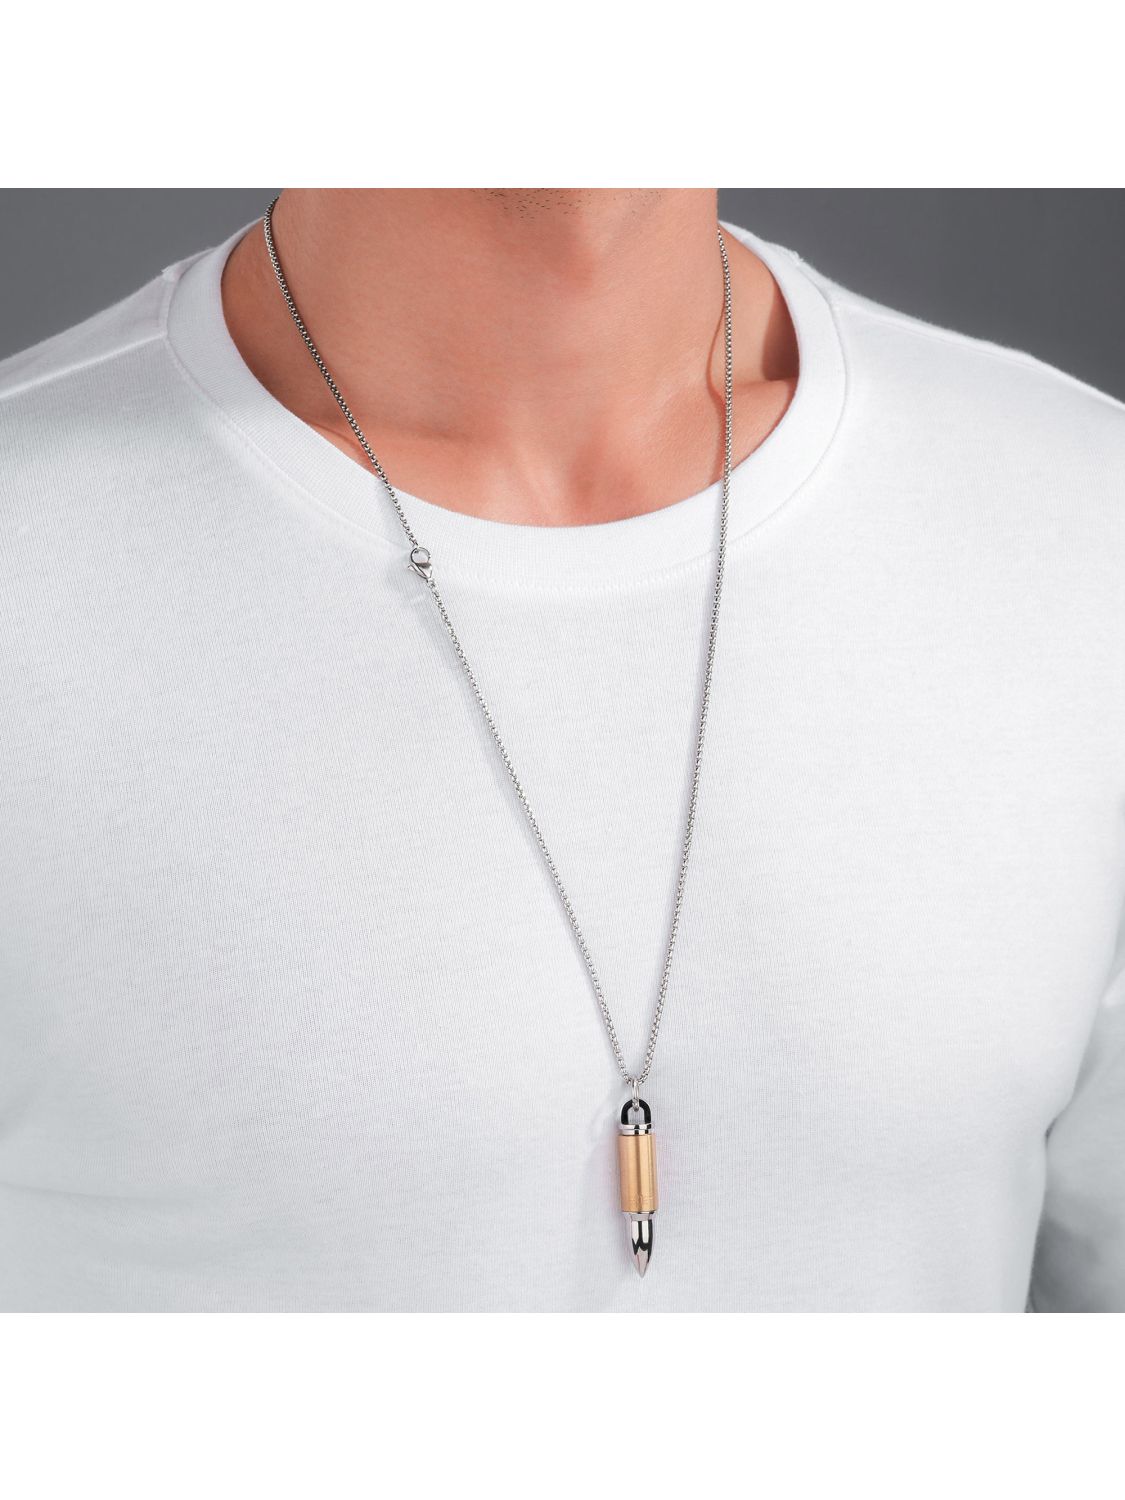 West Coast Jewelry Men's Black Plated Stainless Steel Bullet Capsule Pendant  Necklace - Openable Top | Amazon.com